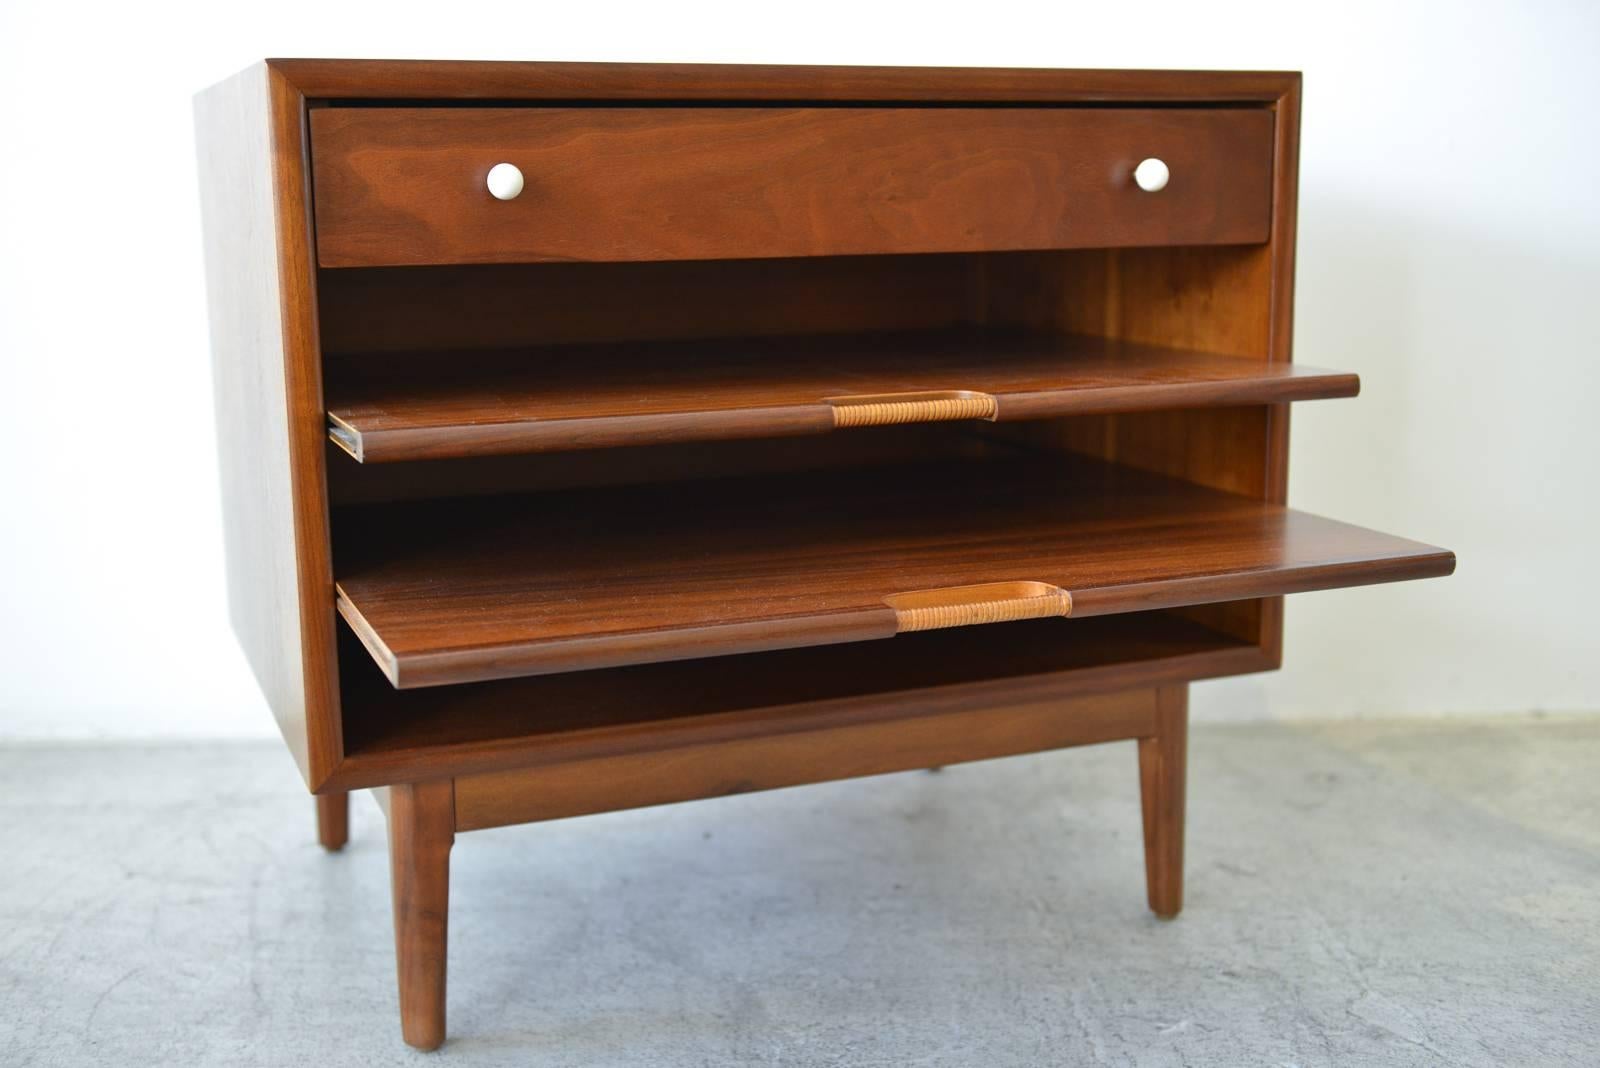 American Pair of Kipp Stewart Nightstands with Pull Out Magazine Shelves, circa 1965